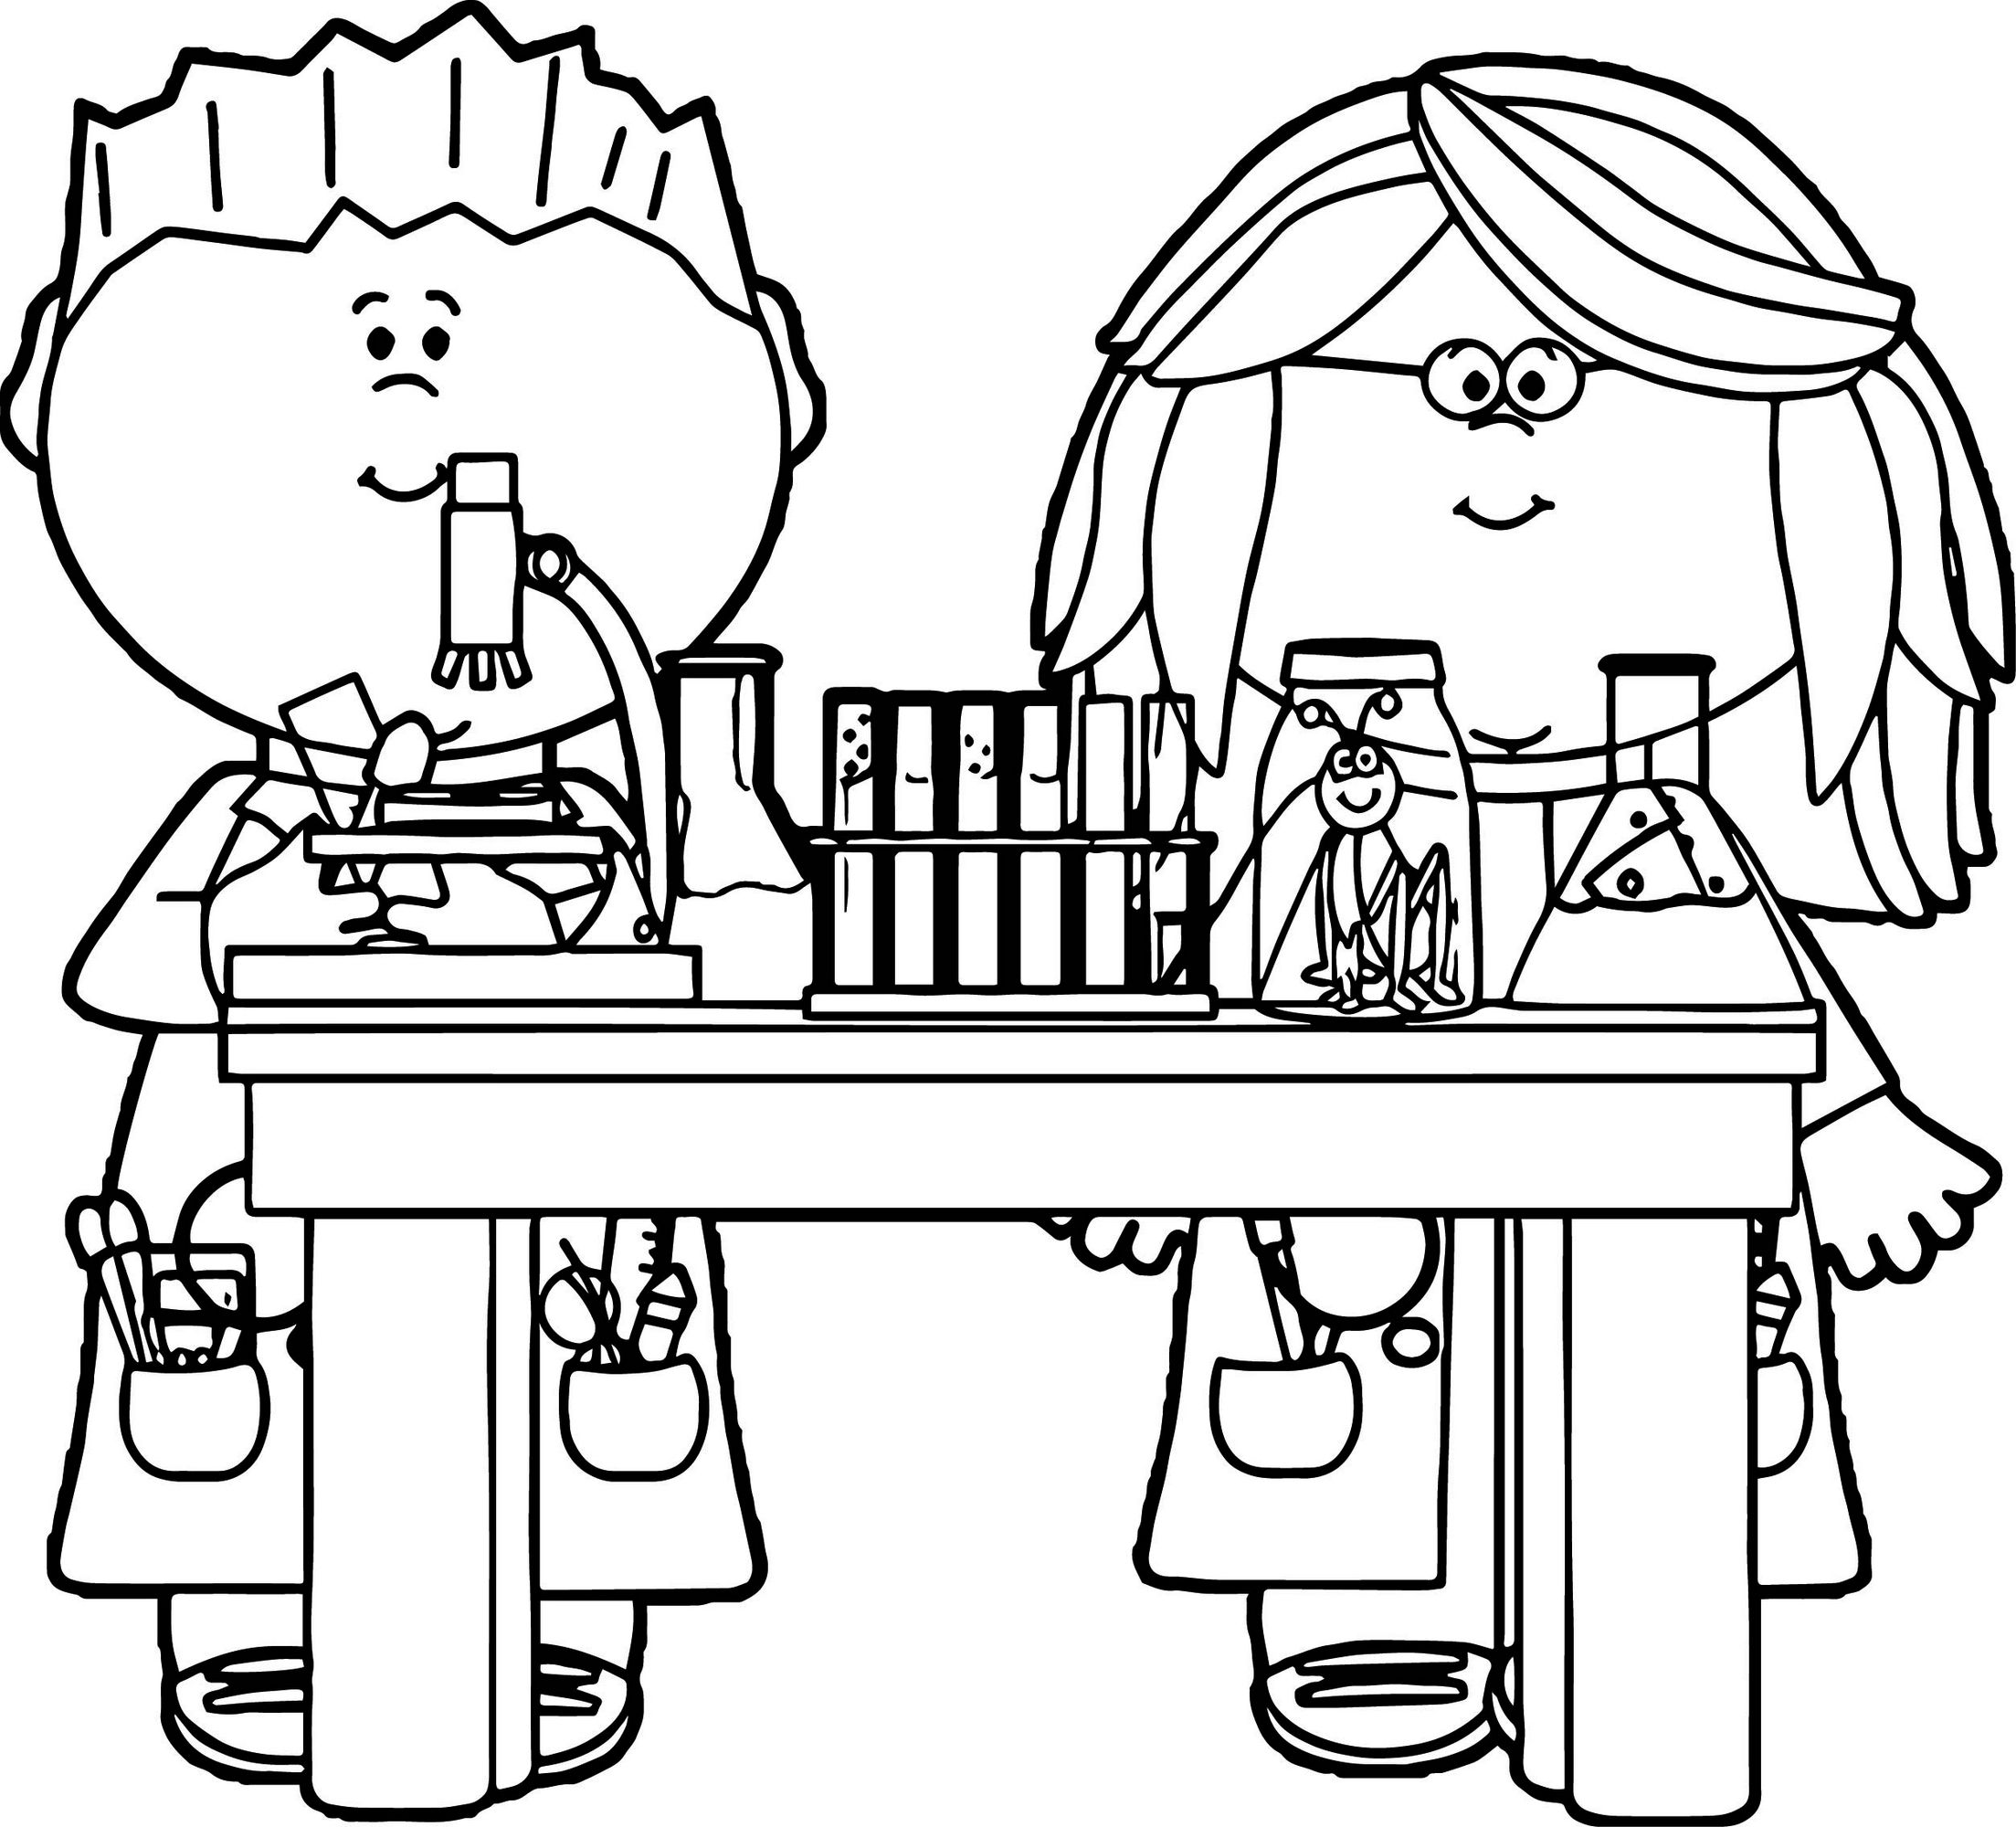 science printable coloring pages science coloring pages birthday printable coloring pages printable science 